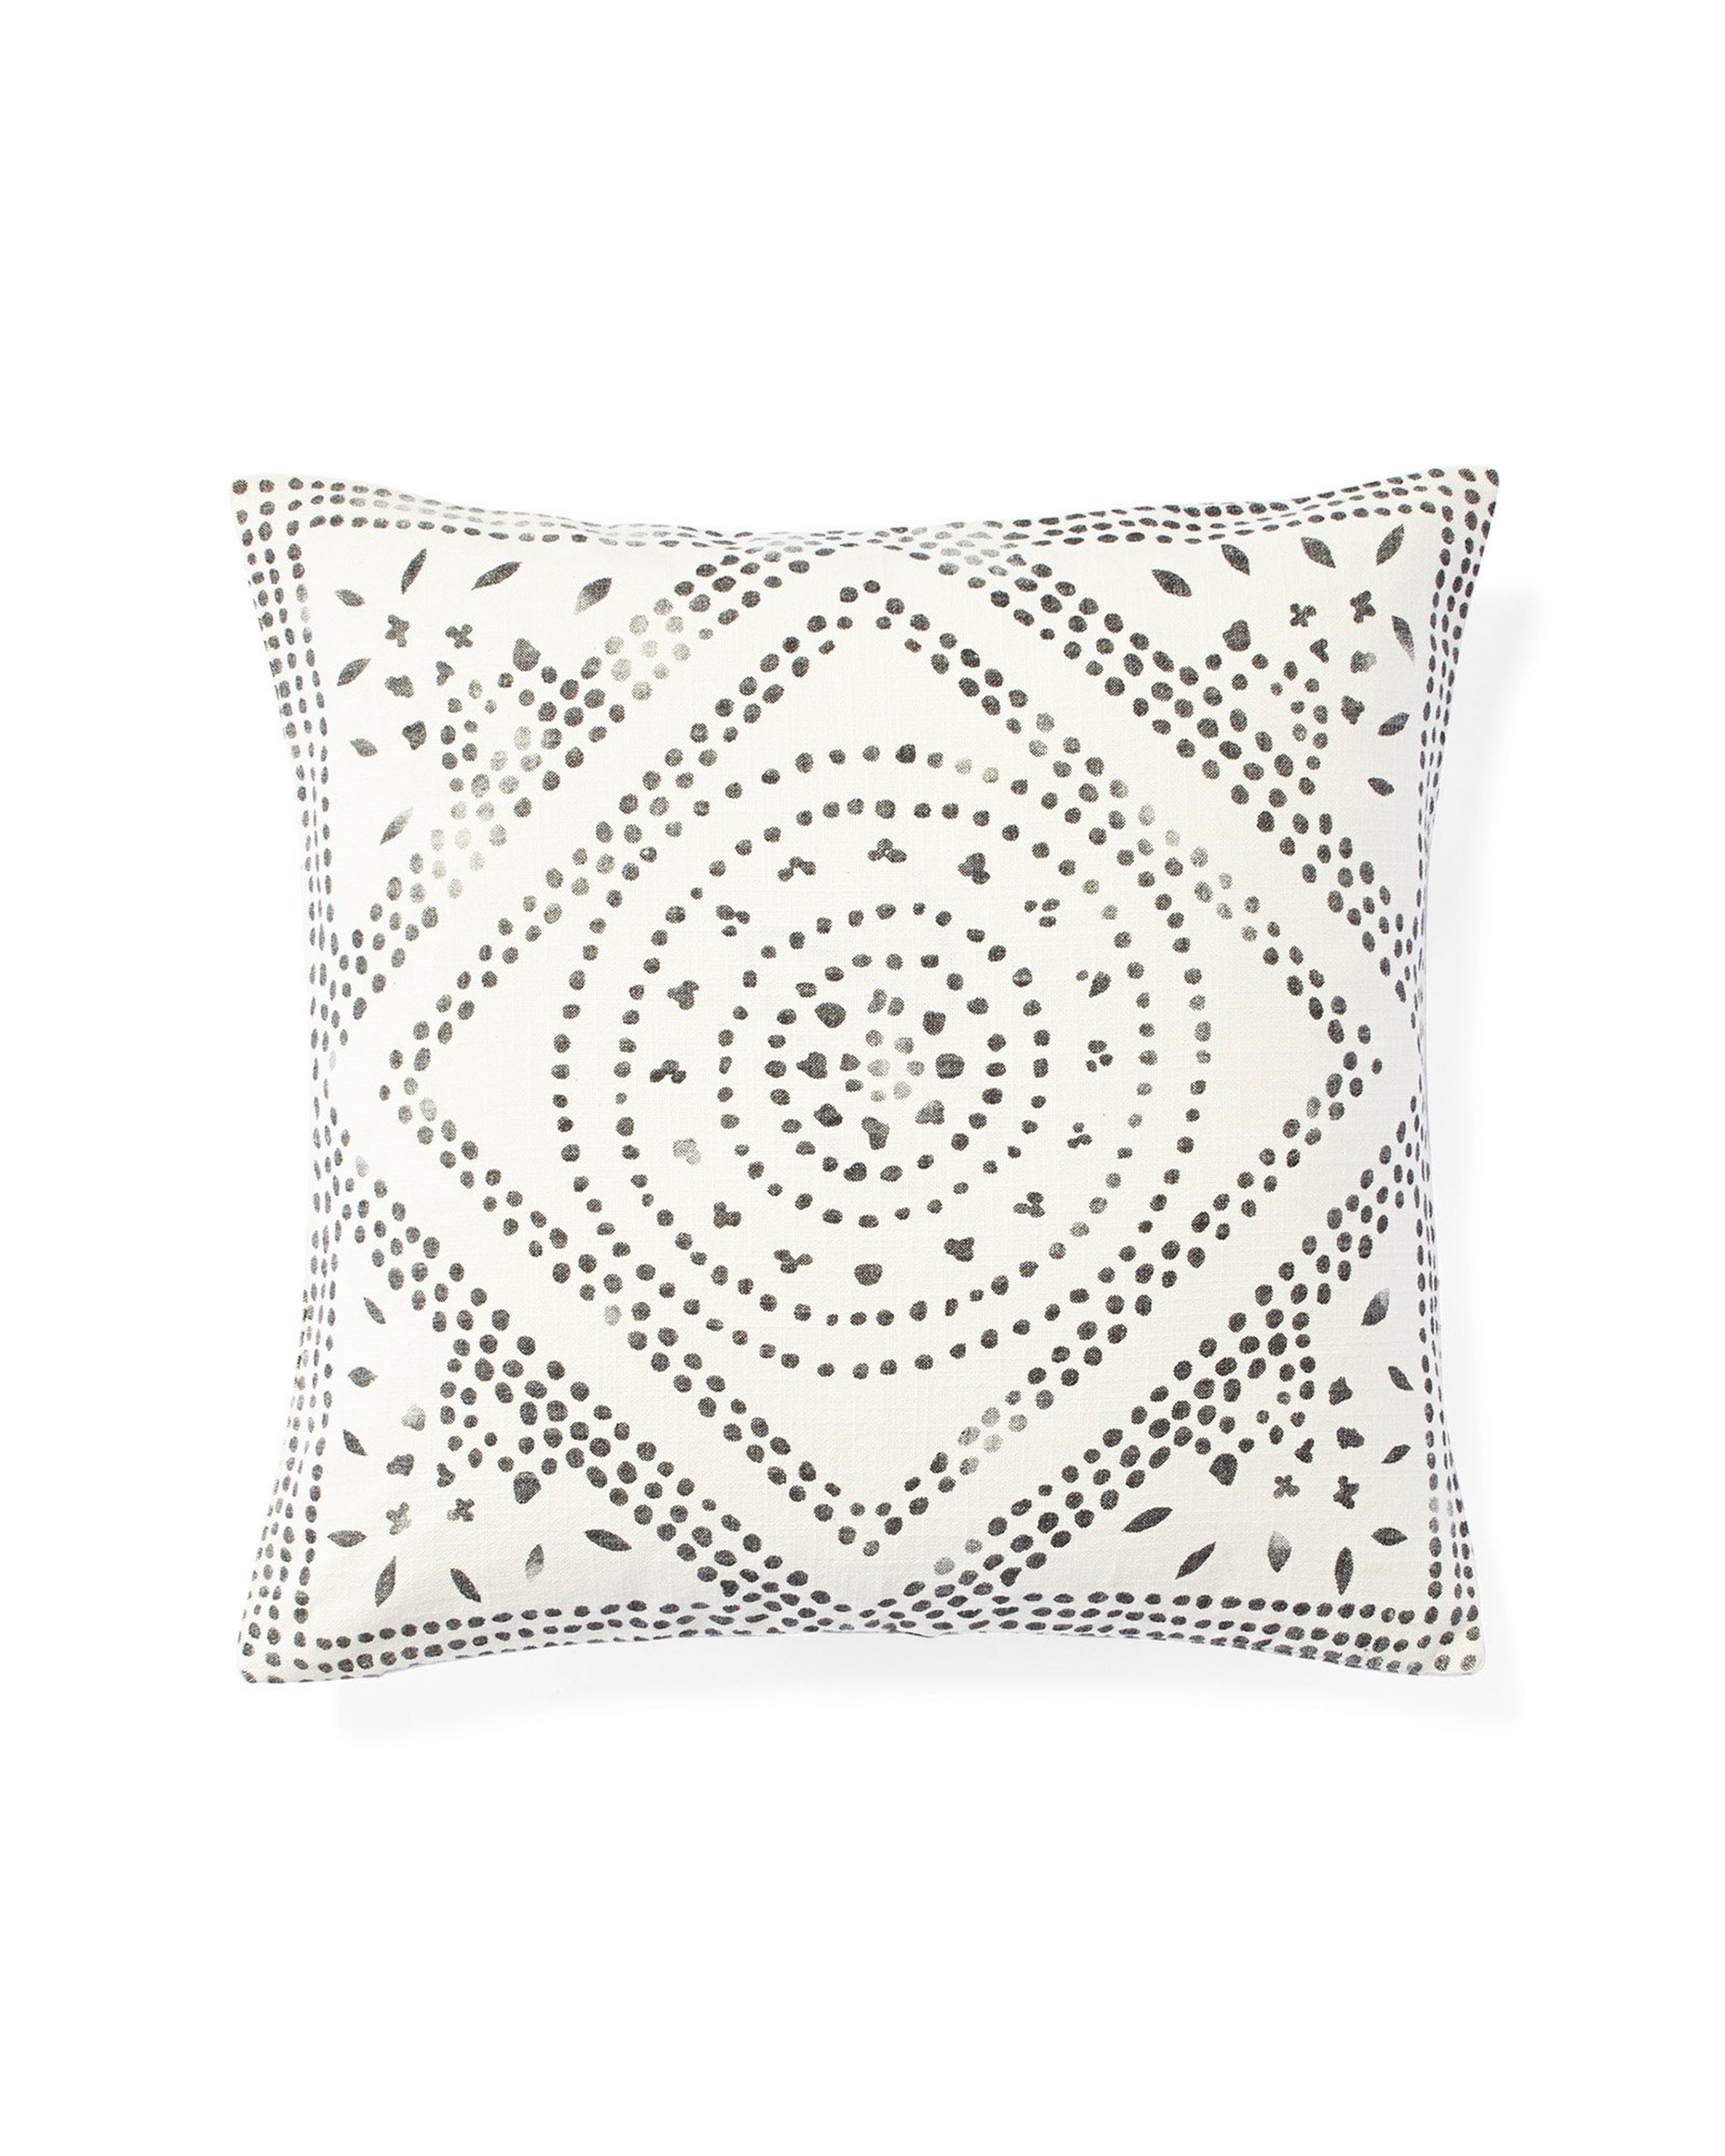 Camille Diamond Medallion 20"SQ. Pillow Cover - Ivory - Insert sold separately - Serena and Lily